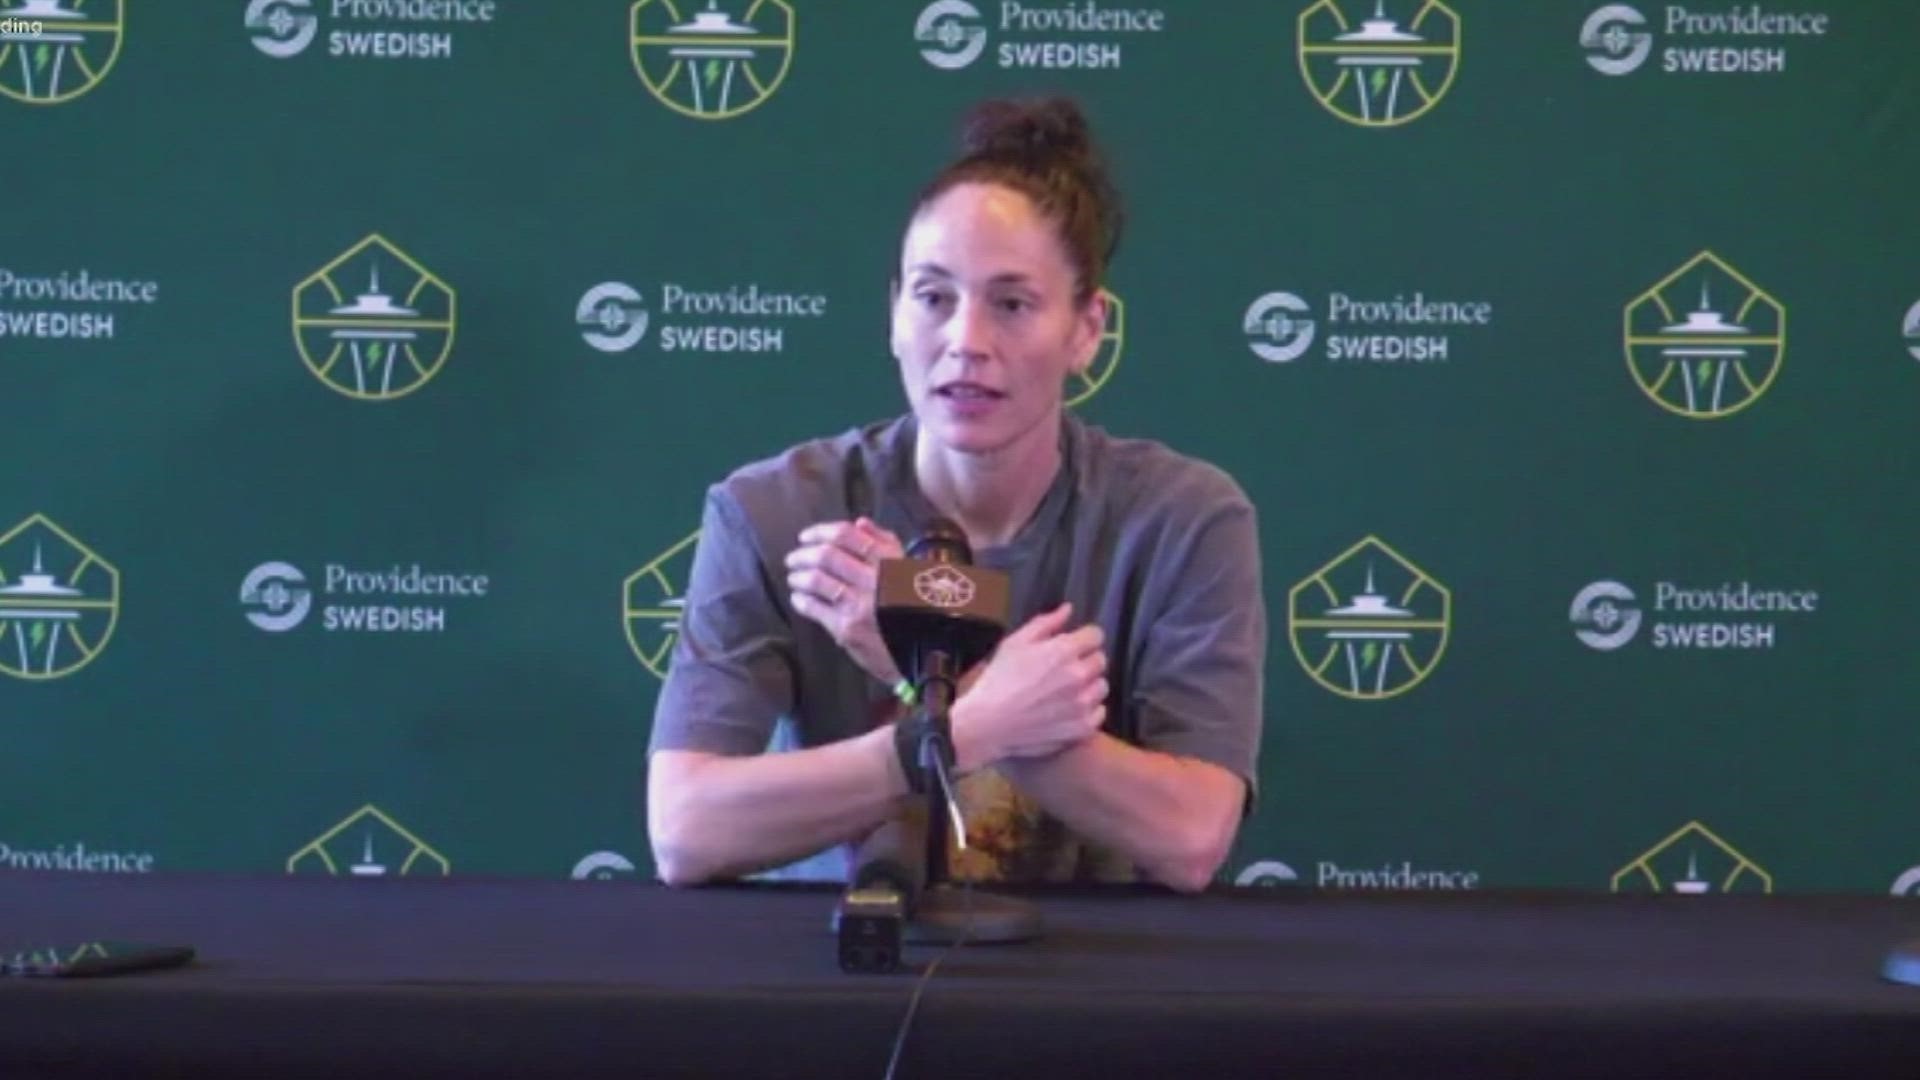 The WNBA legend discusses saying goodbye and staying involved with the Seattle Storm.